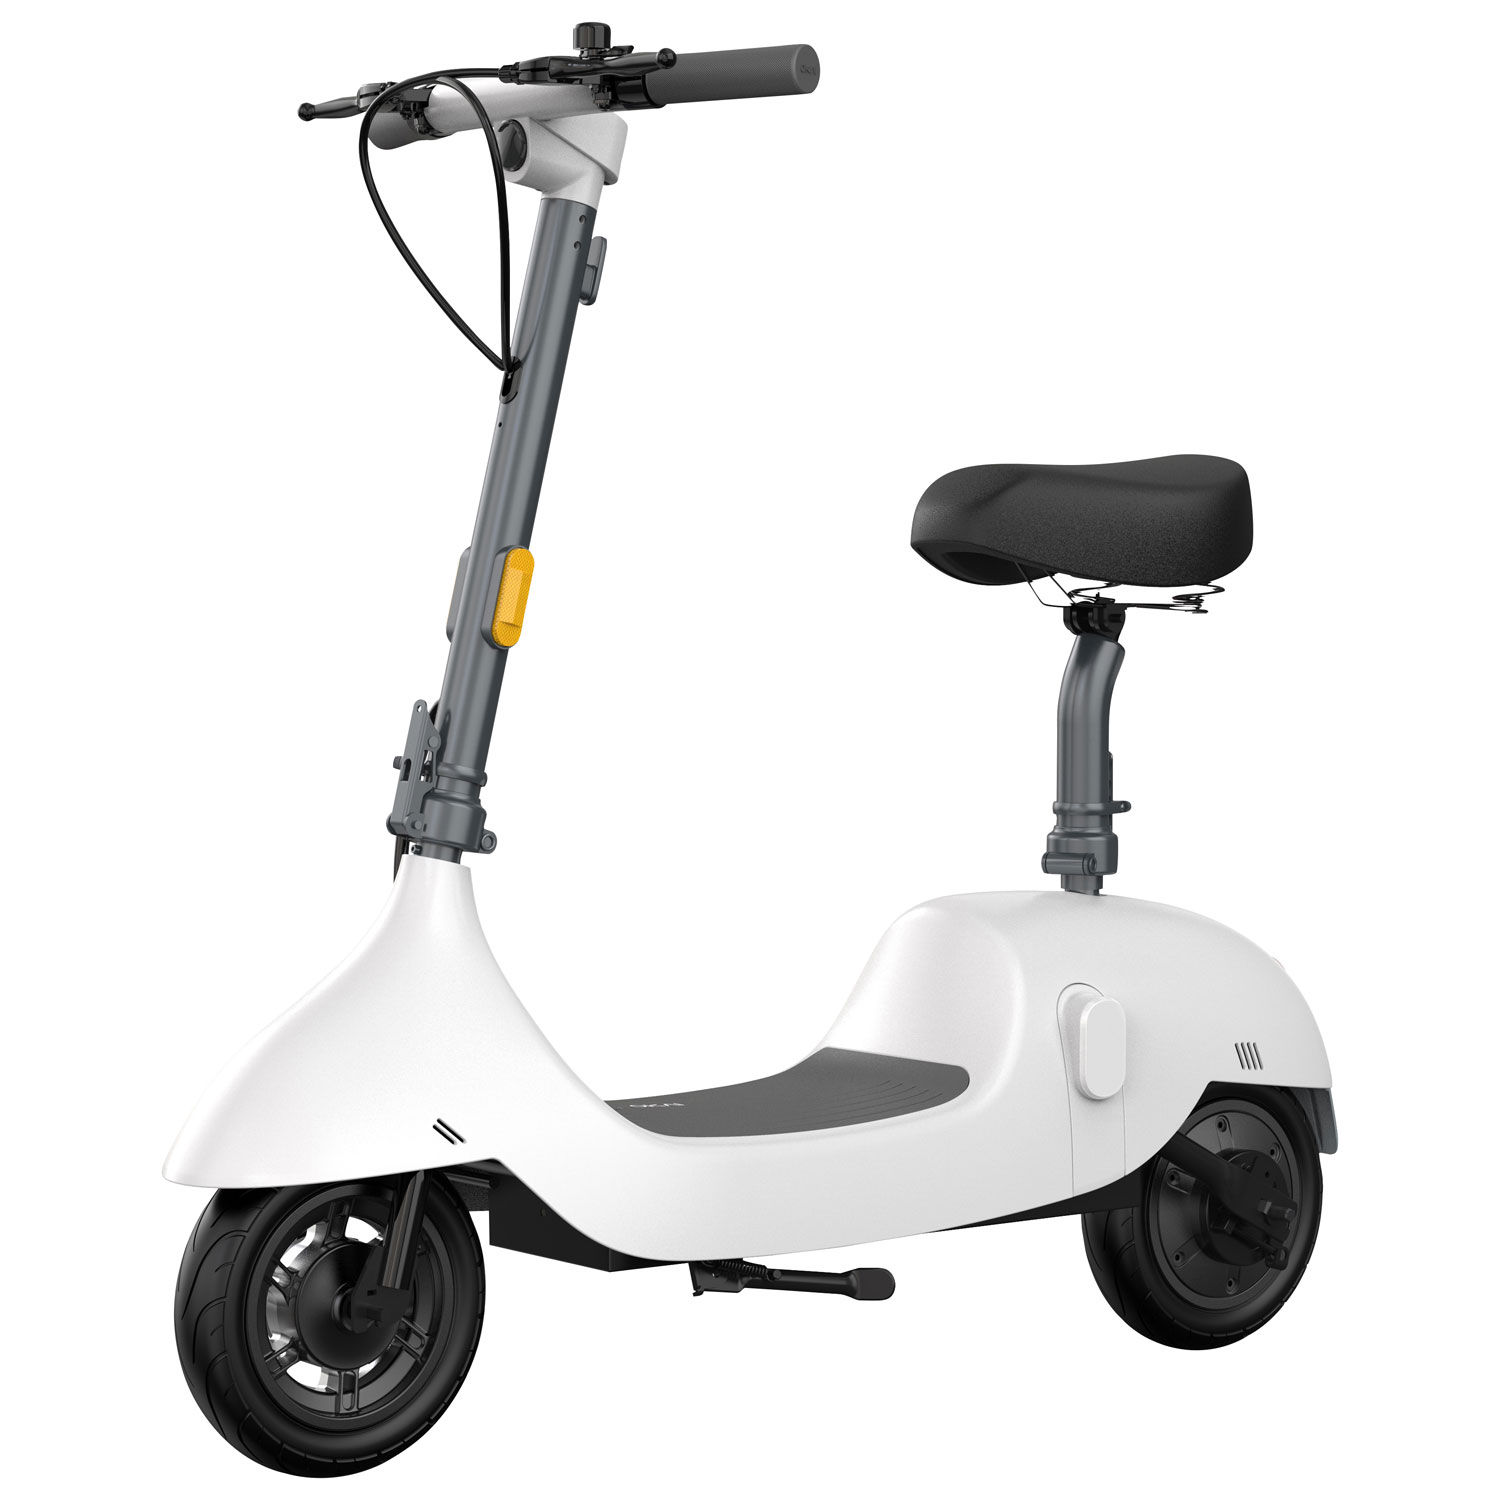 OKAI Beetle EA10A Seated Adult Electric Scooter (350 W Motor /40 km Range/ 25 km/h Top Speed) - White - Only at Best Buy